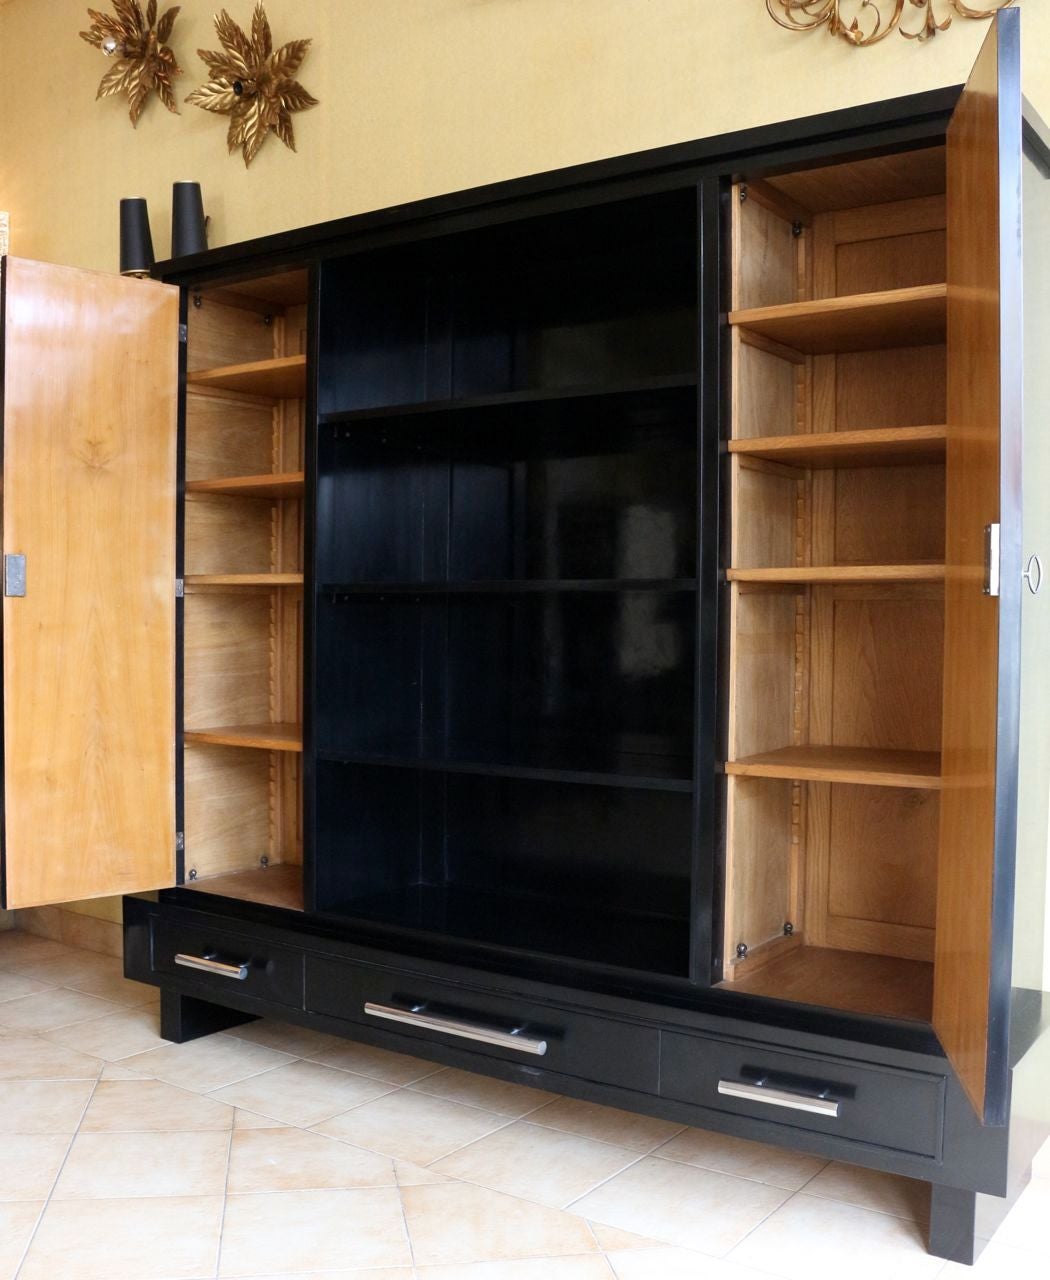 1940's bookcase by René Gabriel in black waxed lacquer, composed of two doors on each side of the furniture, the exterior in black lacquer, the interior in mahogany and equipped with adjustable shelves in height.
In the center of the cabinet, a